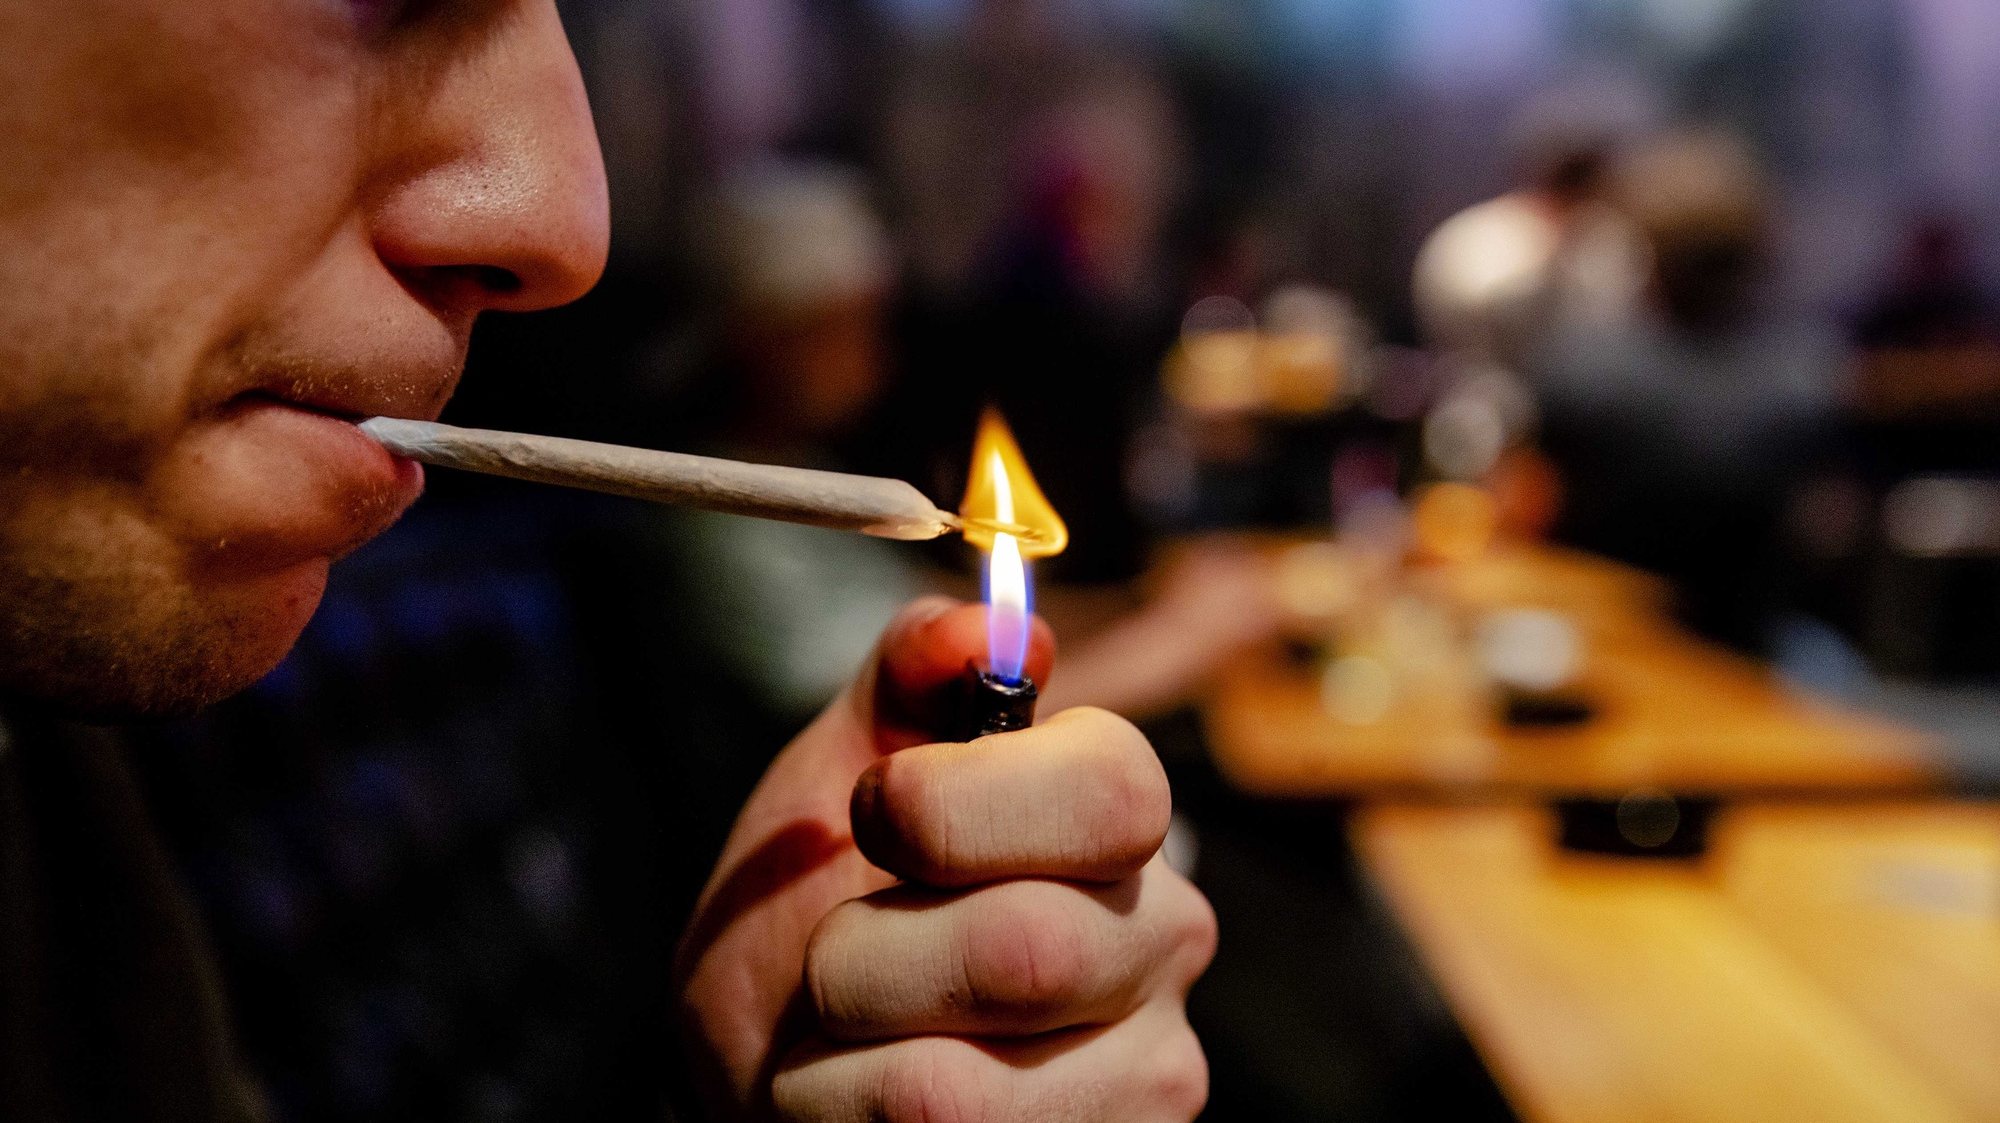 epa07523289 A man lights a weed joint in Cremers coffee shop, in The Hague, the Netherlands, 22 April 2019 (issued 23 April 2019). In the Netherlands, an experiment with state-regulated marijuana cultivation is starting. The aim of the experiment is to show whether weed can be removed from crime, but also what the use of cannabis means for health.  EPA/ROBIN VAN LONKHUIJSEN  ATTENTION: This Image is part of a PHOTO SET